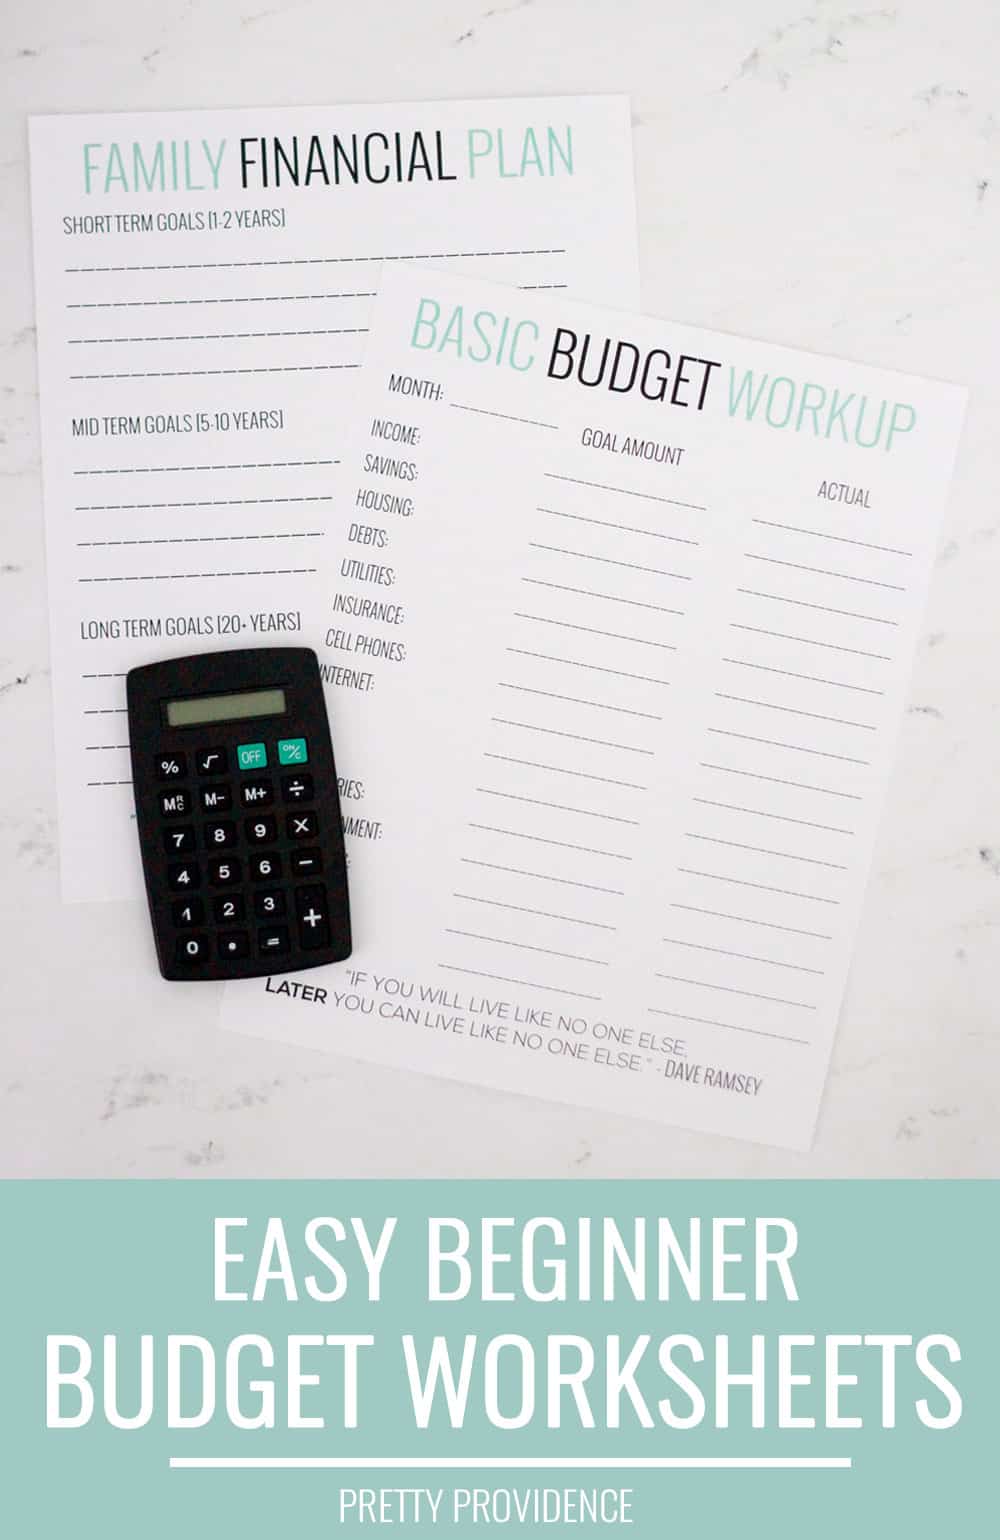 Basic budgeting with free worksheets to help you get going! Easy way to get started if you've never budgeted before!